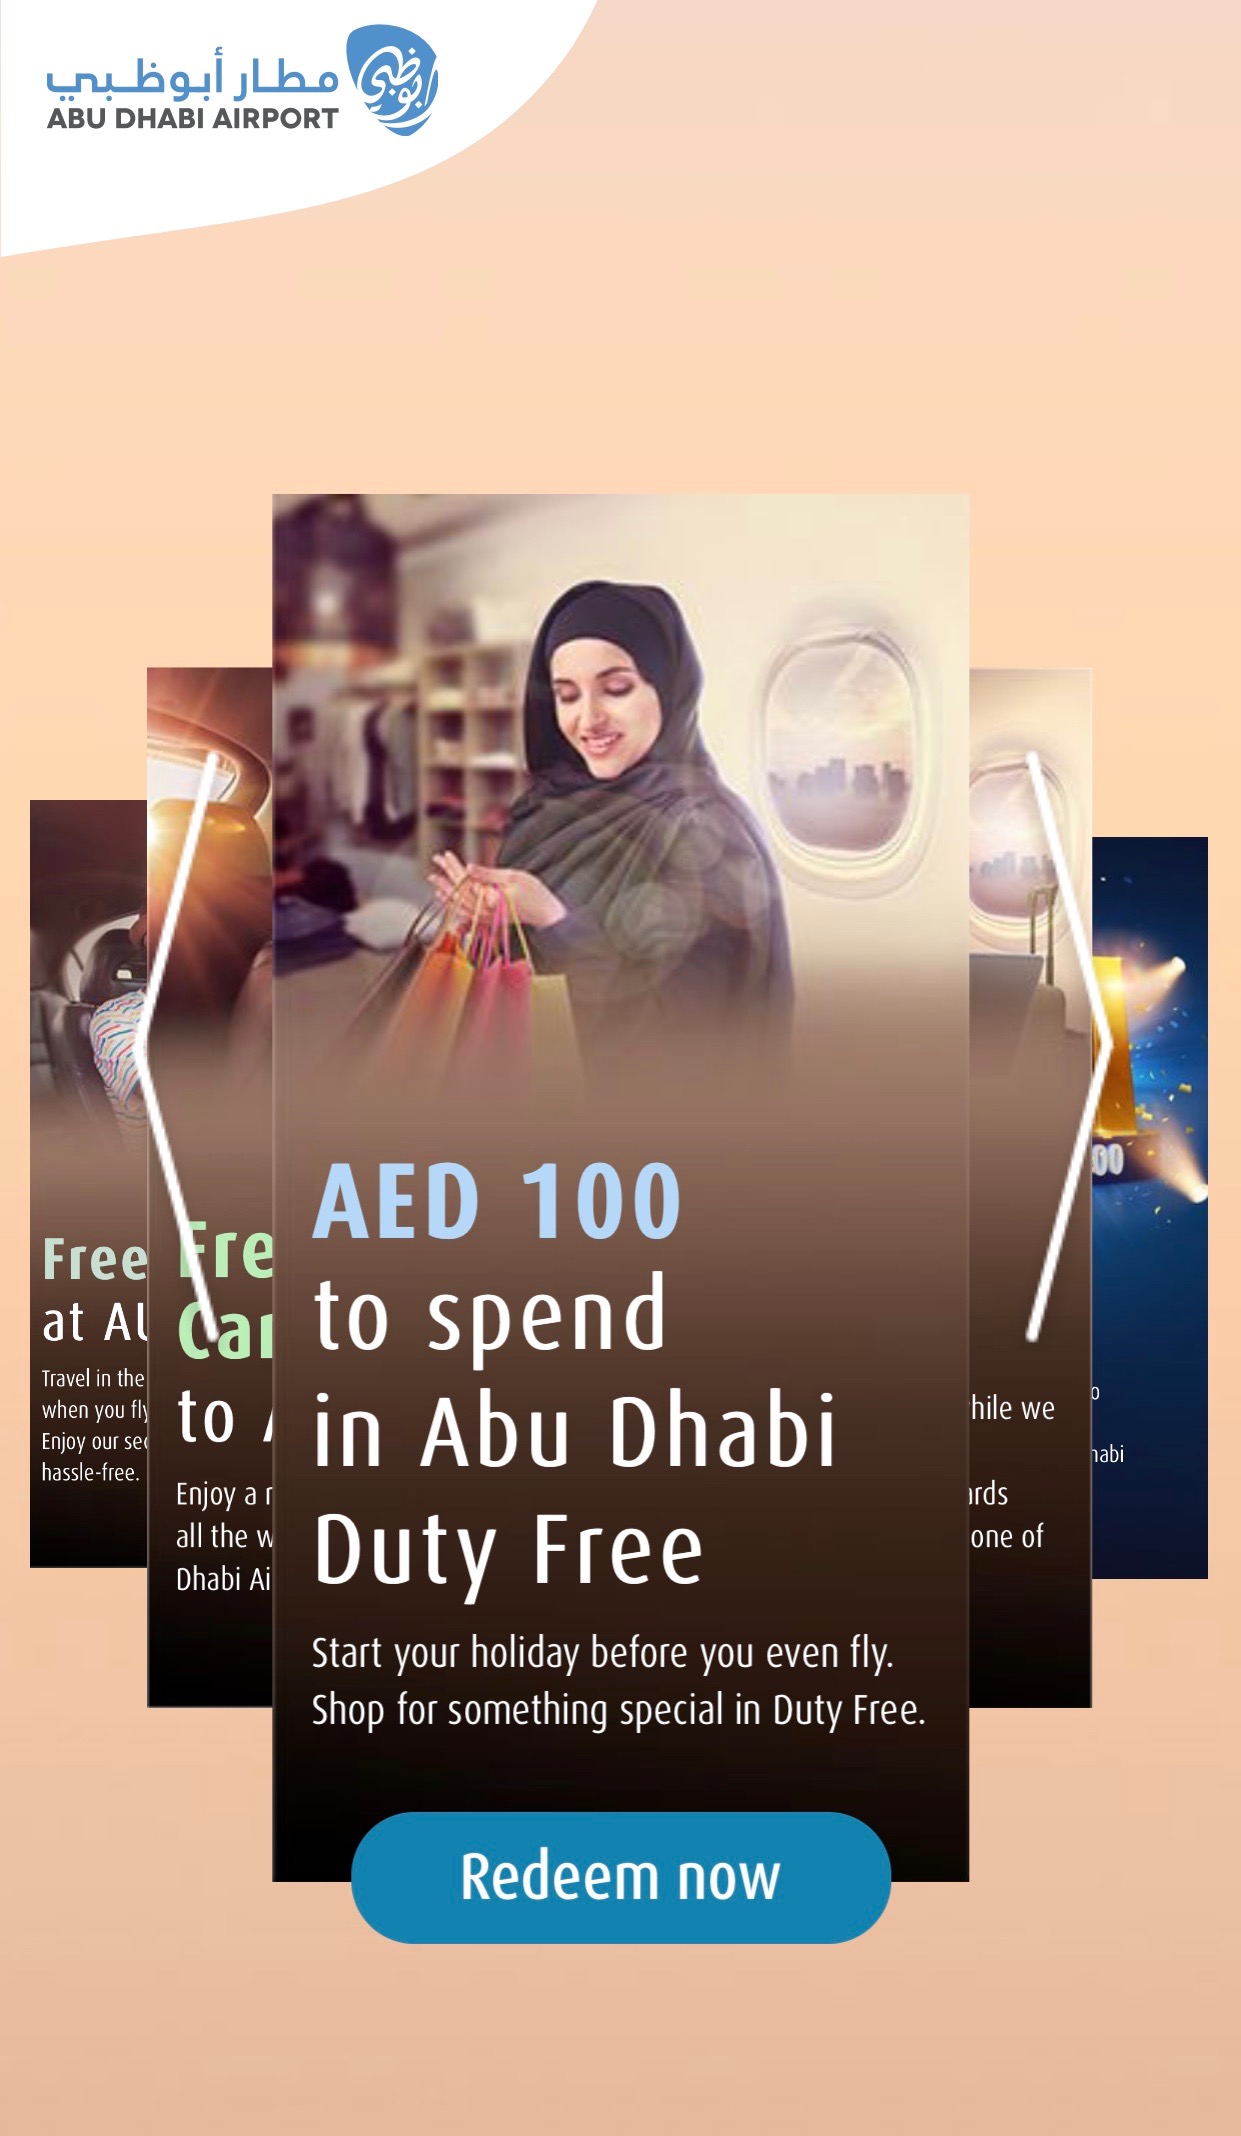 Free AED 100.00 to spend in Abu Dhabi Duty Free